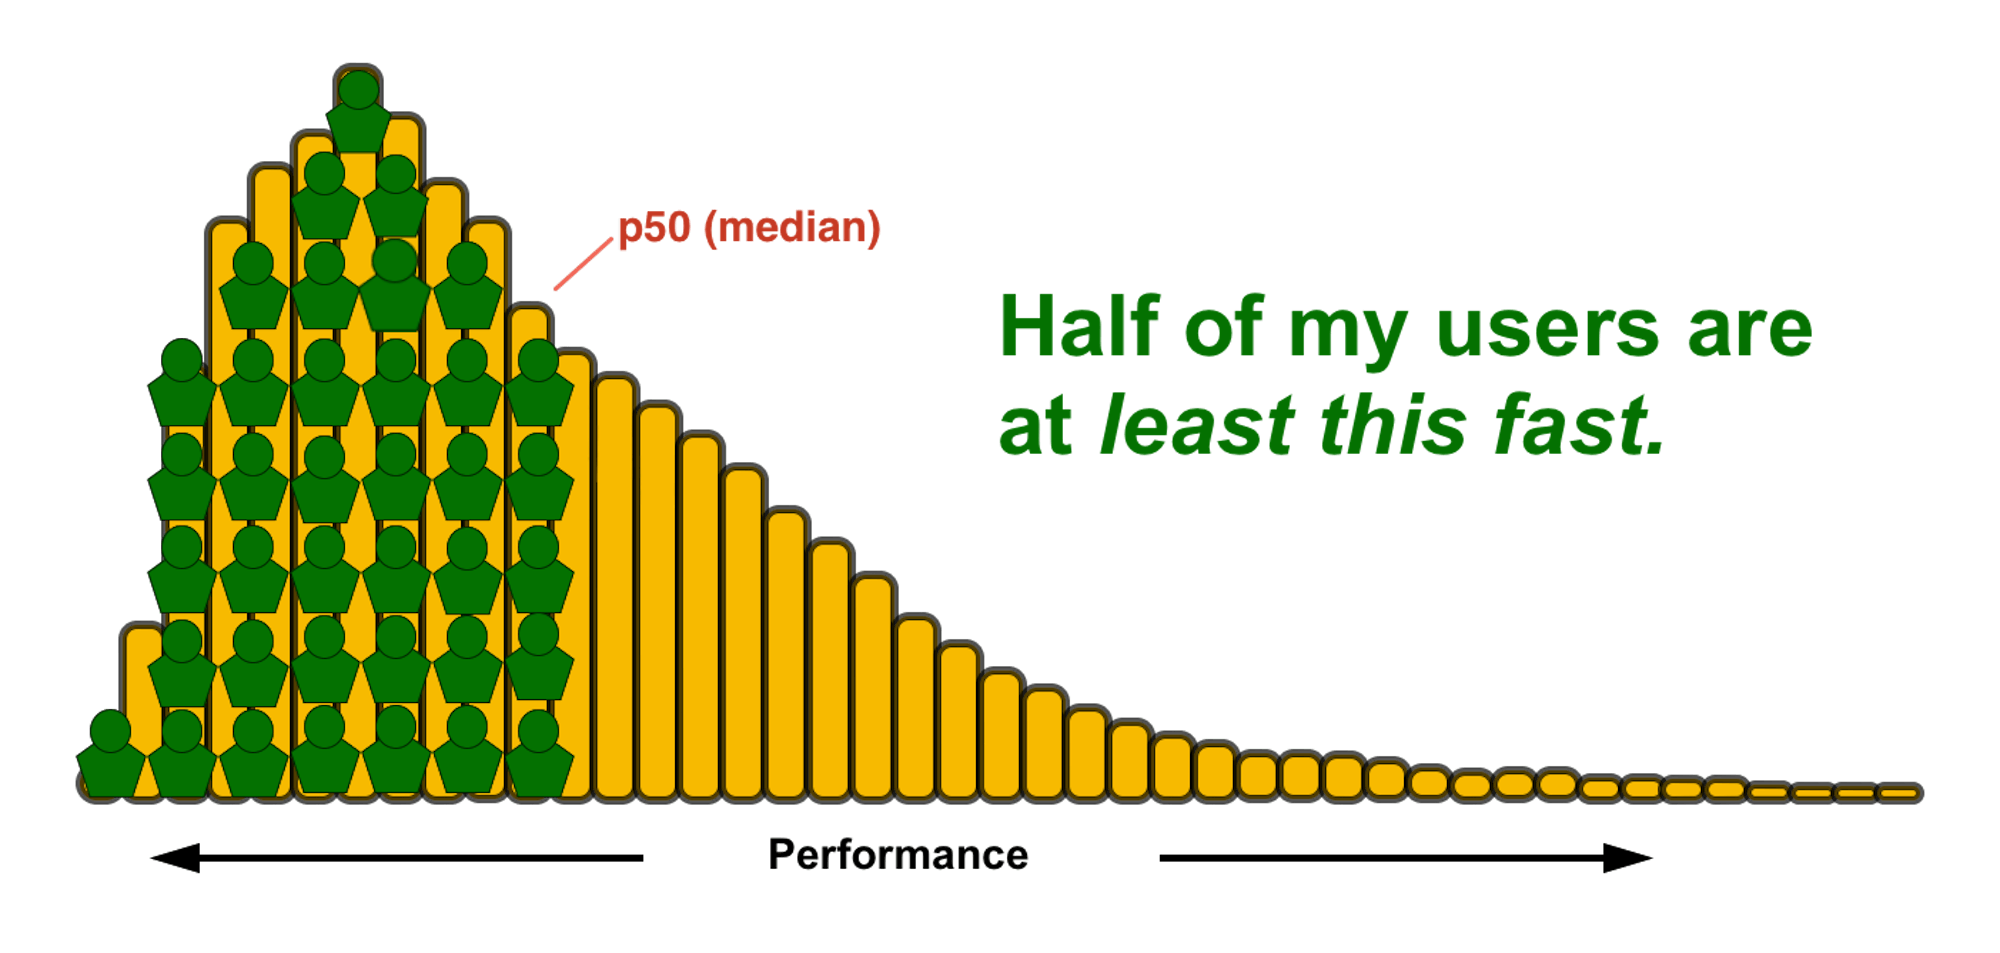 Histogram showing users in green up to the median or 50th percentile.